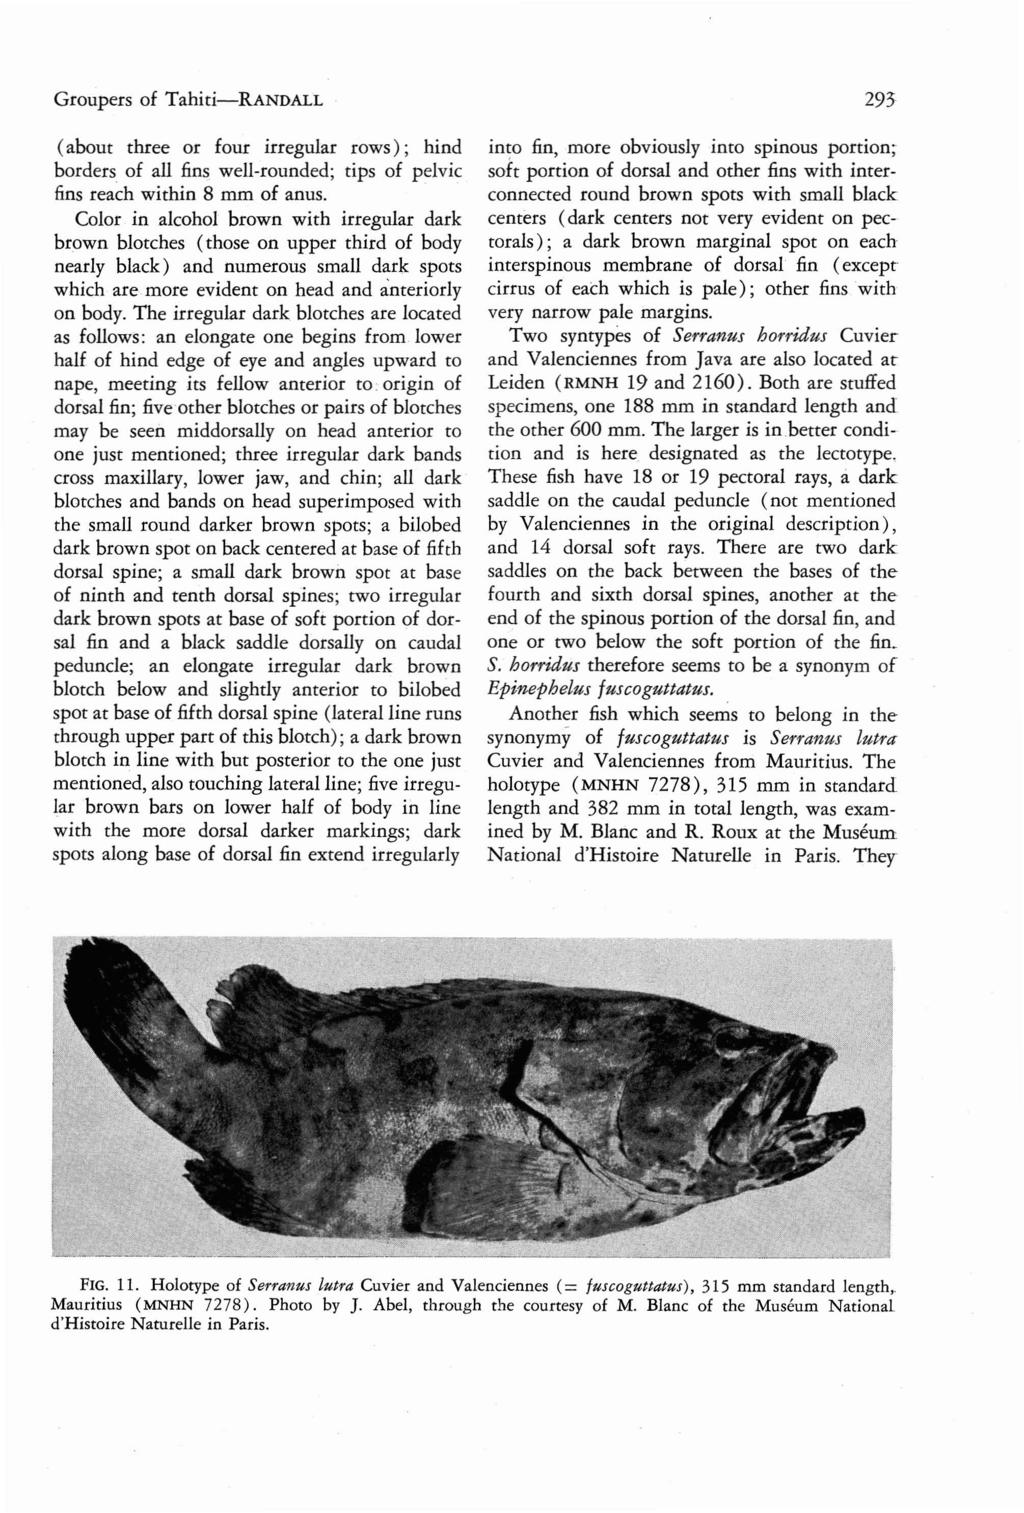 Groupers of Tahiti-RANDALL ( about thr ee or four irregular rows ) ; hind borders of all fins well-rounded; tips of pelvic fins reach within 8 mm of anus.